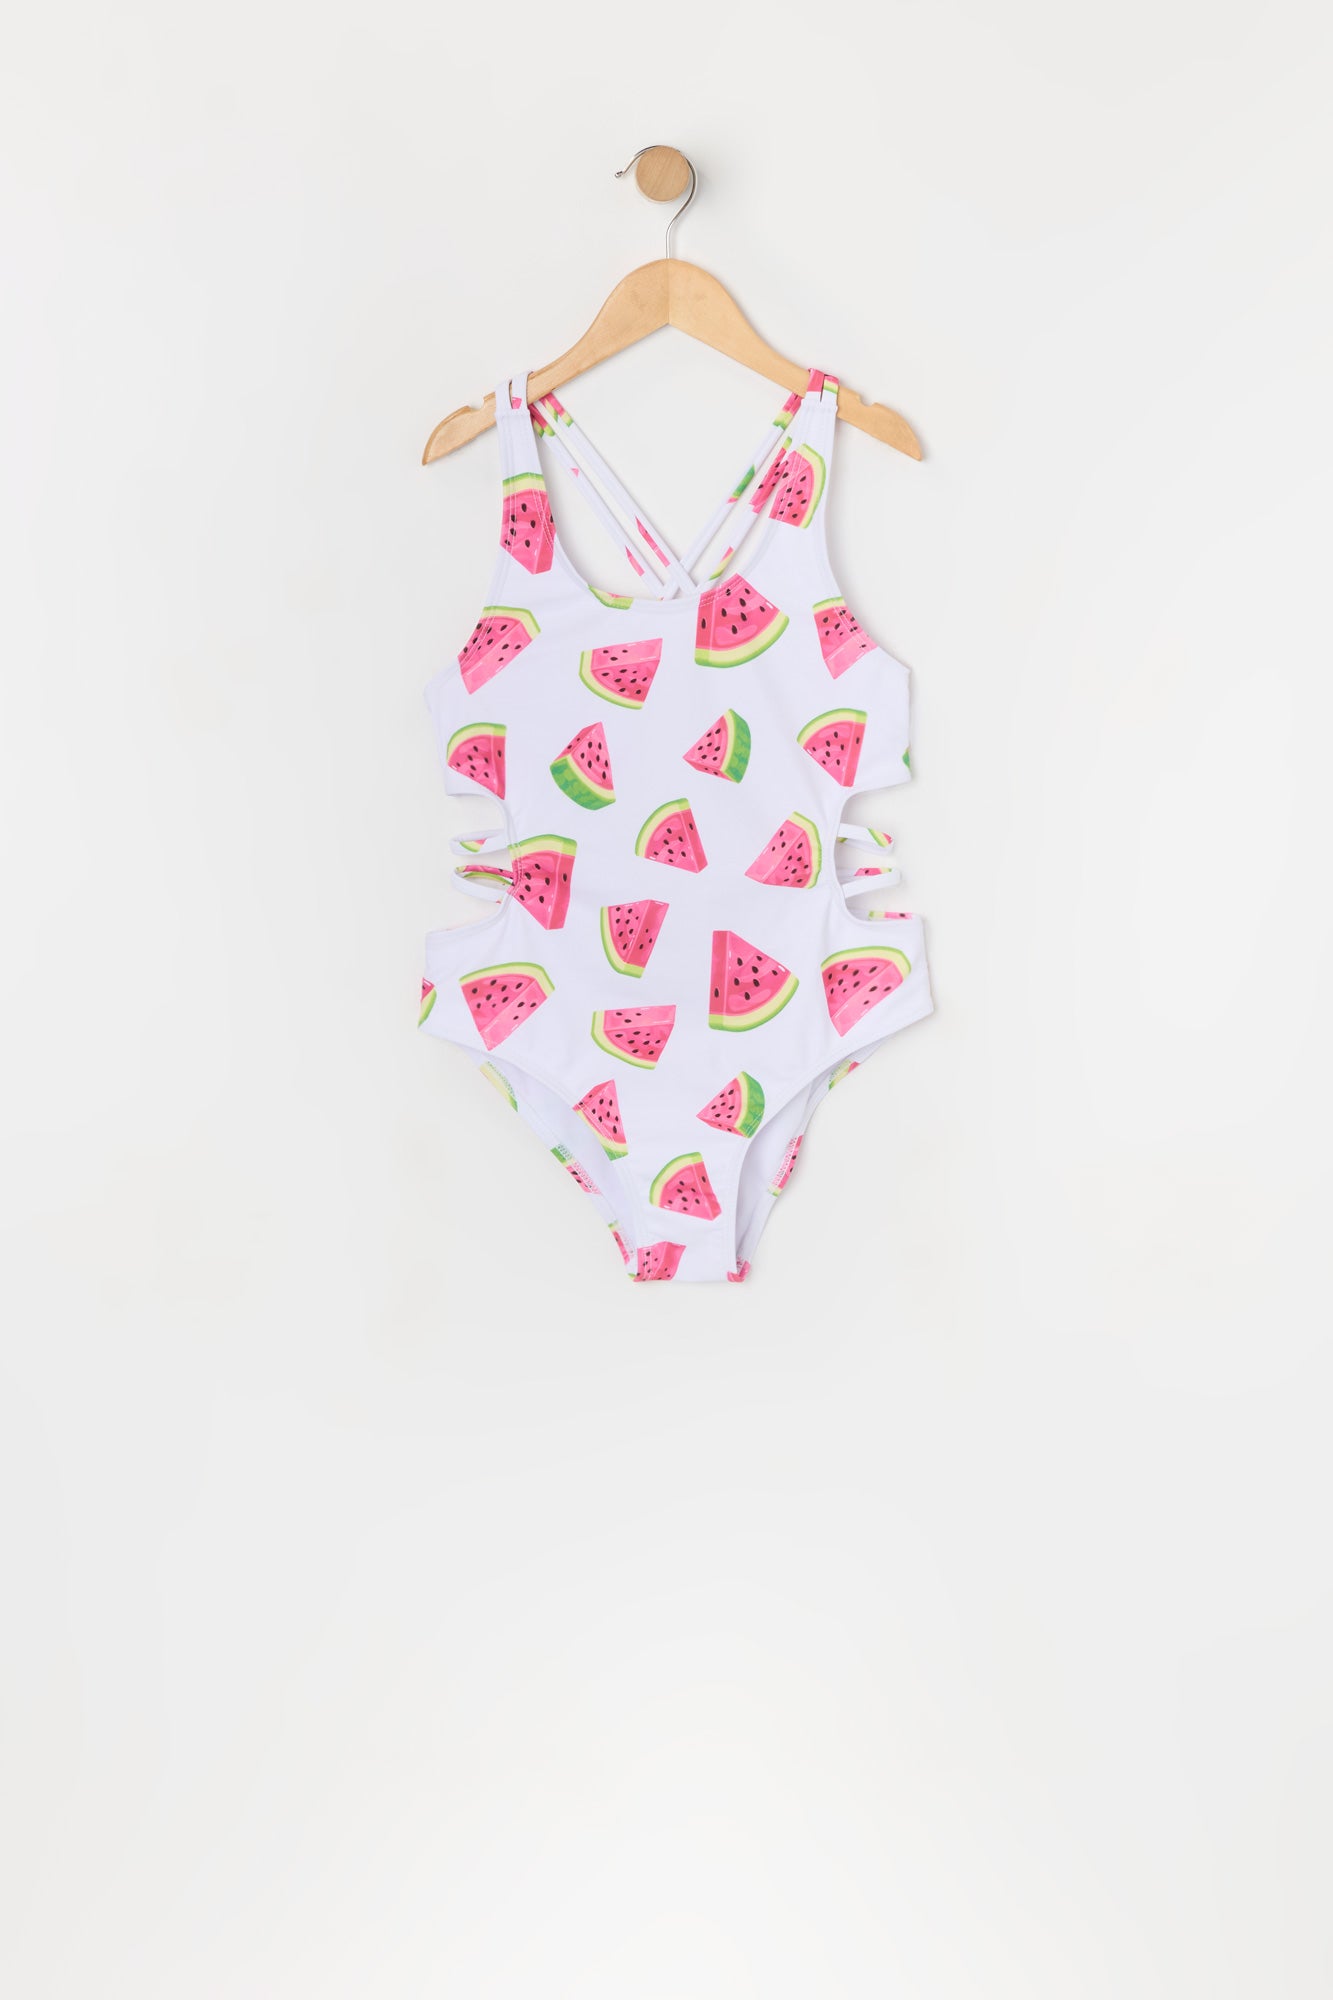 Girls Watermelon Print Strappy One Piece Swimsuit with built-in cups